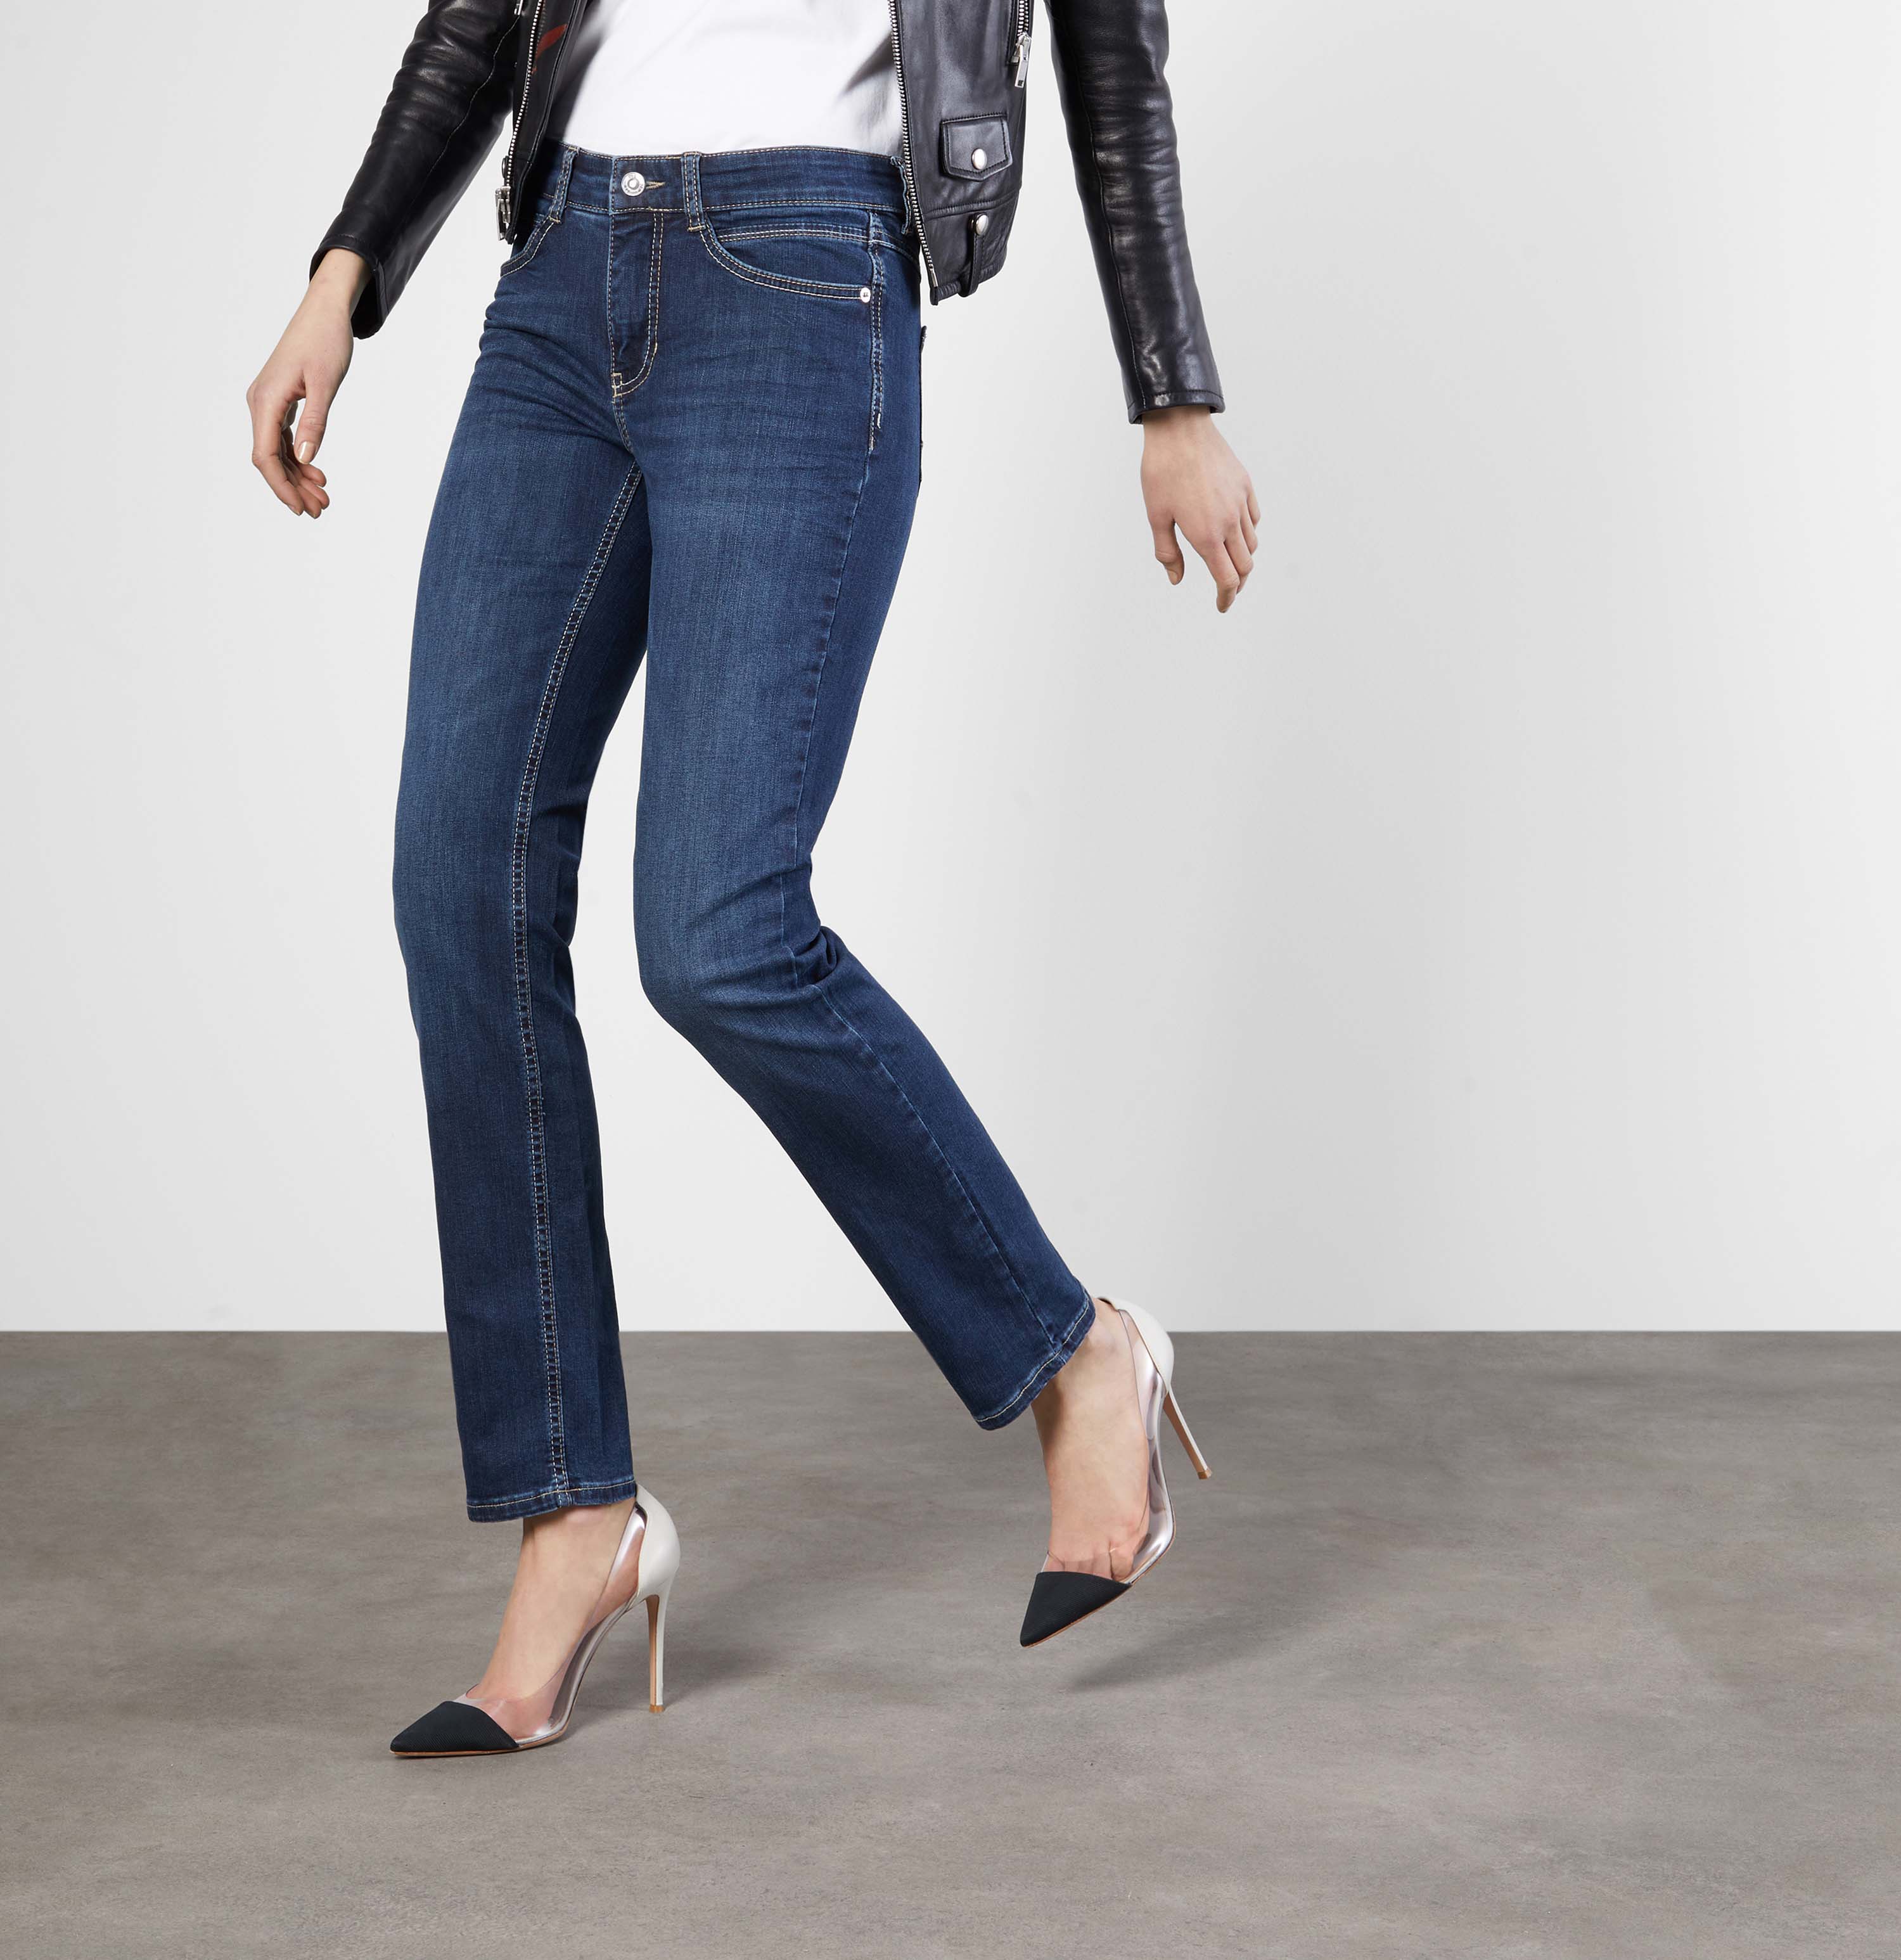 MAC JEANS - ANGELA, PERFECT Fit Forever Denim